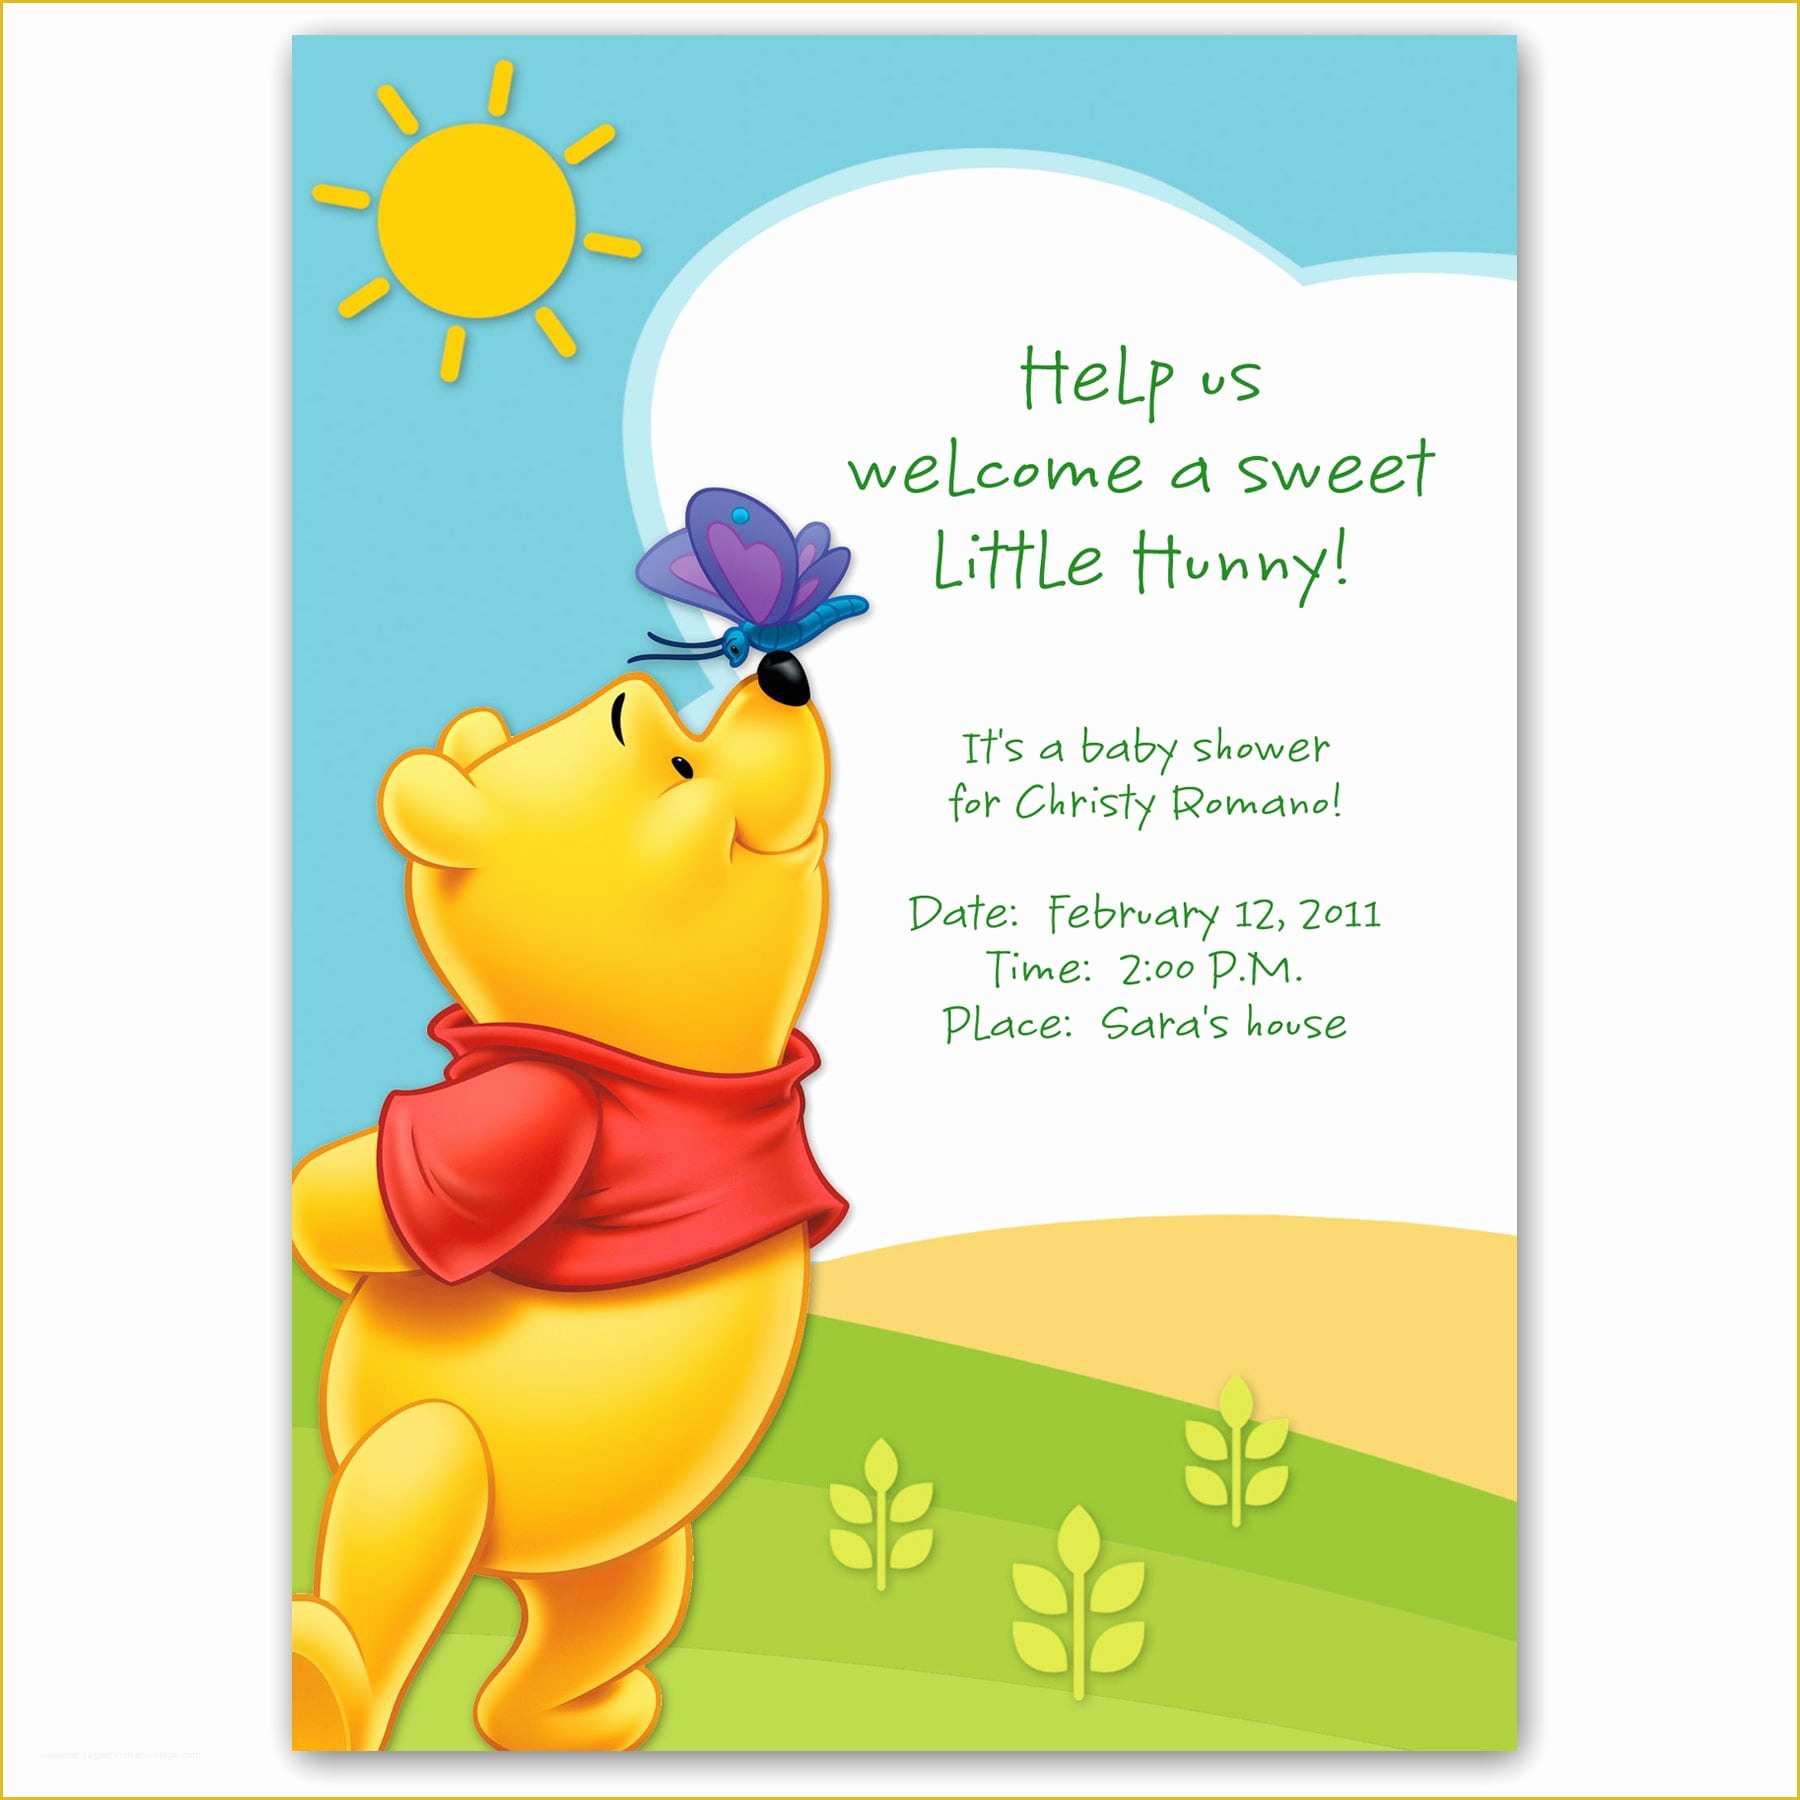 Winnie the Pooh Baby Shower Invitations Templates Free Of Winnie the Pooh Baby Shower Invitation Template